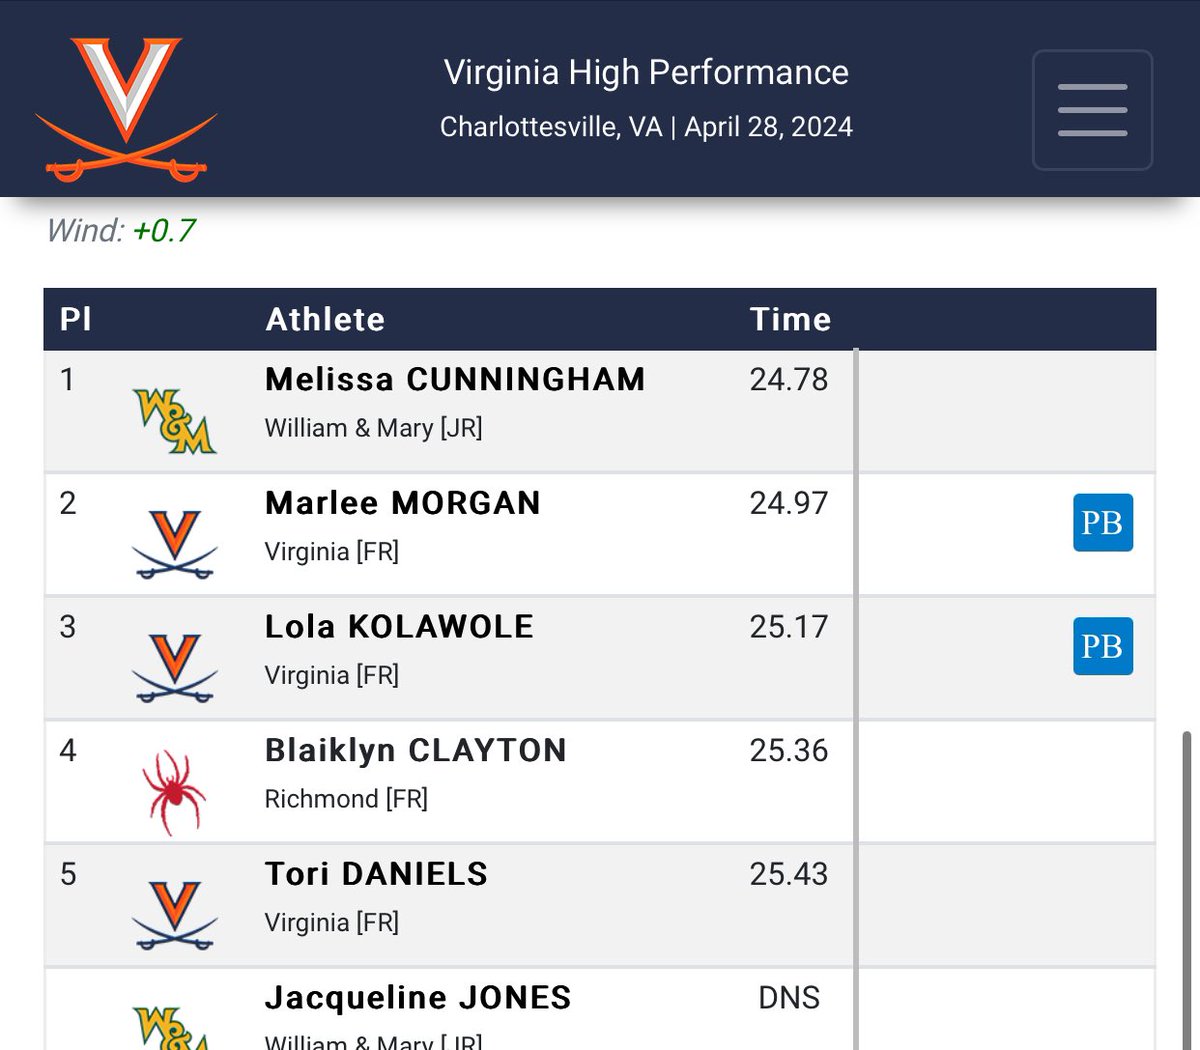 UVA High Performance 200M | Blaiklyn Clayton on the come back trail is the 4th place finisher running 25.36.